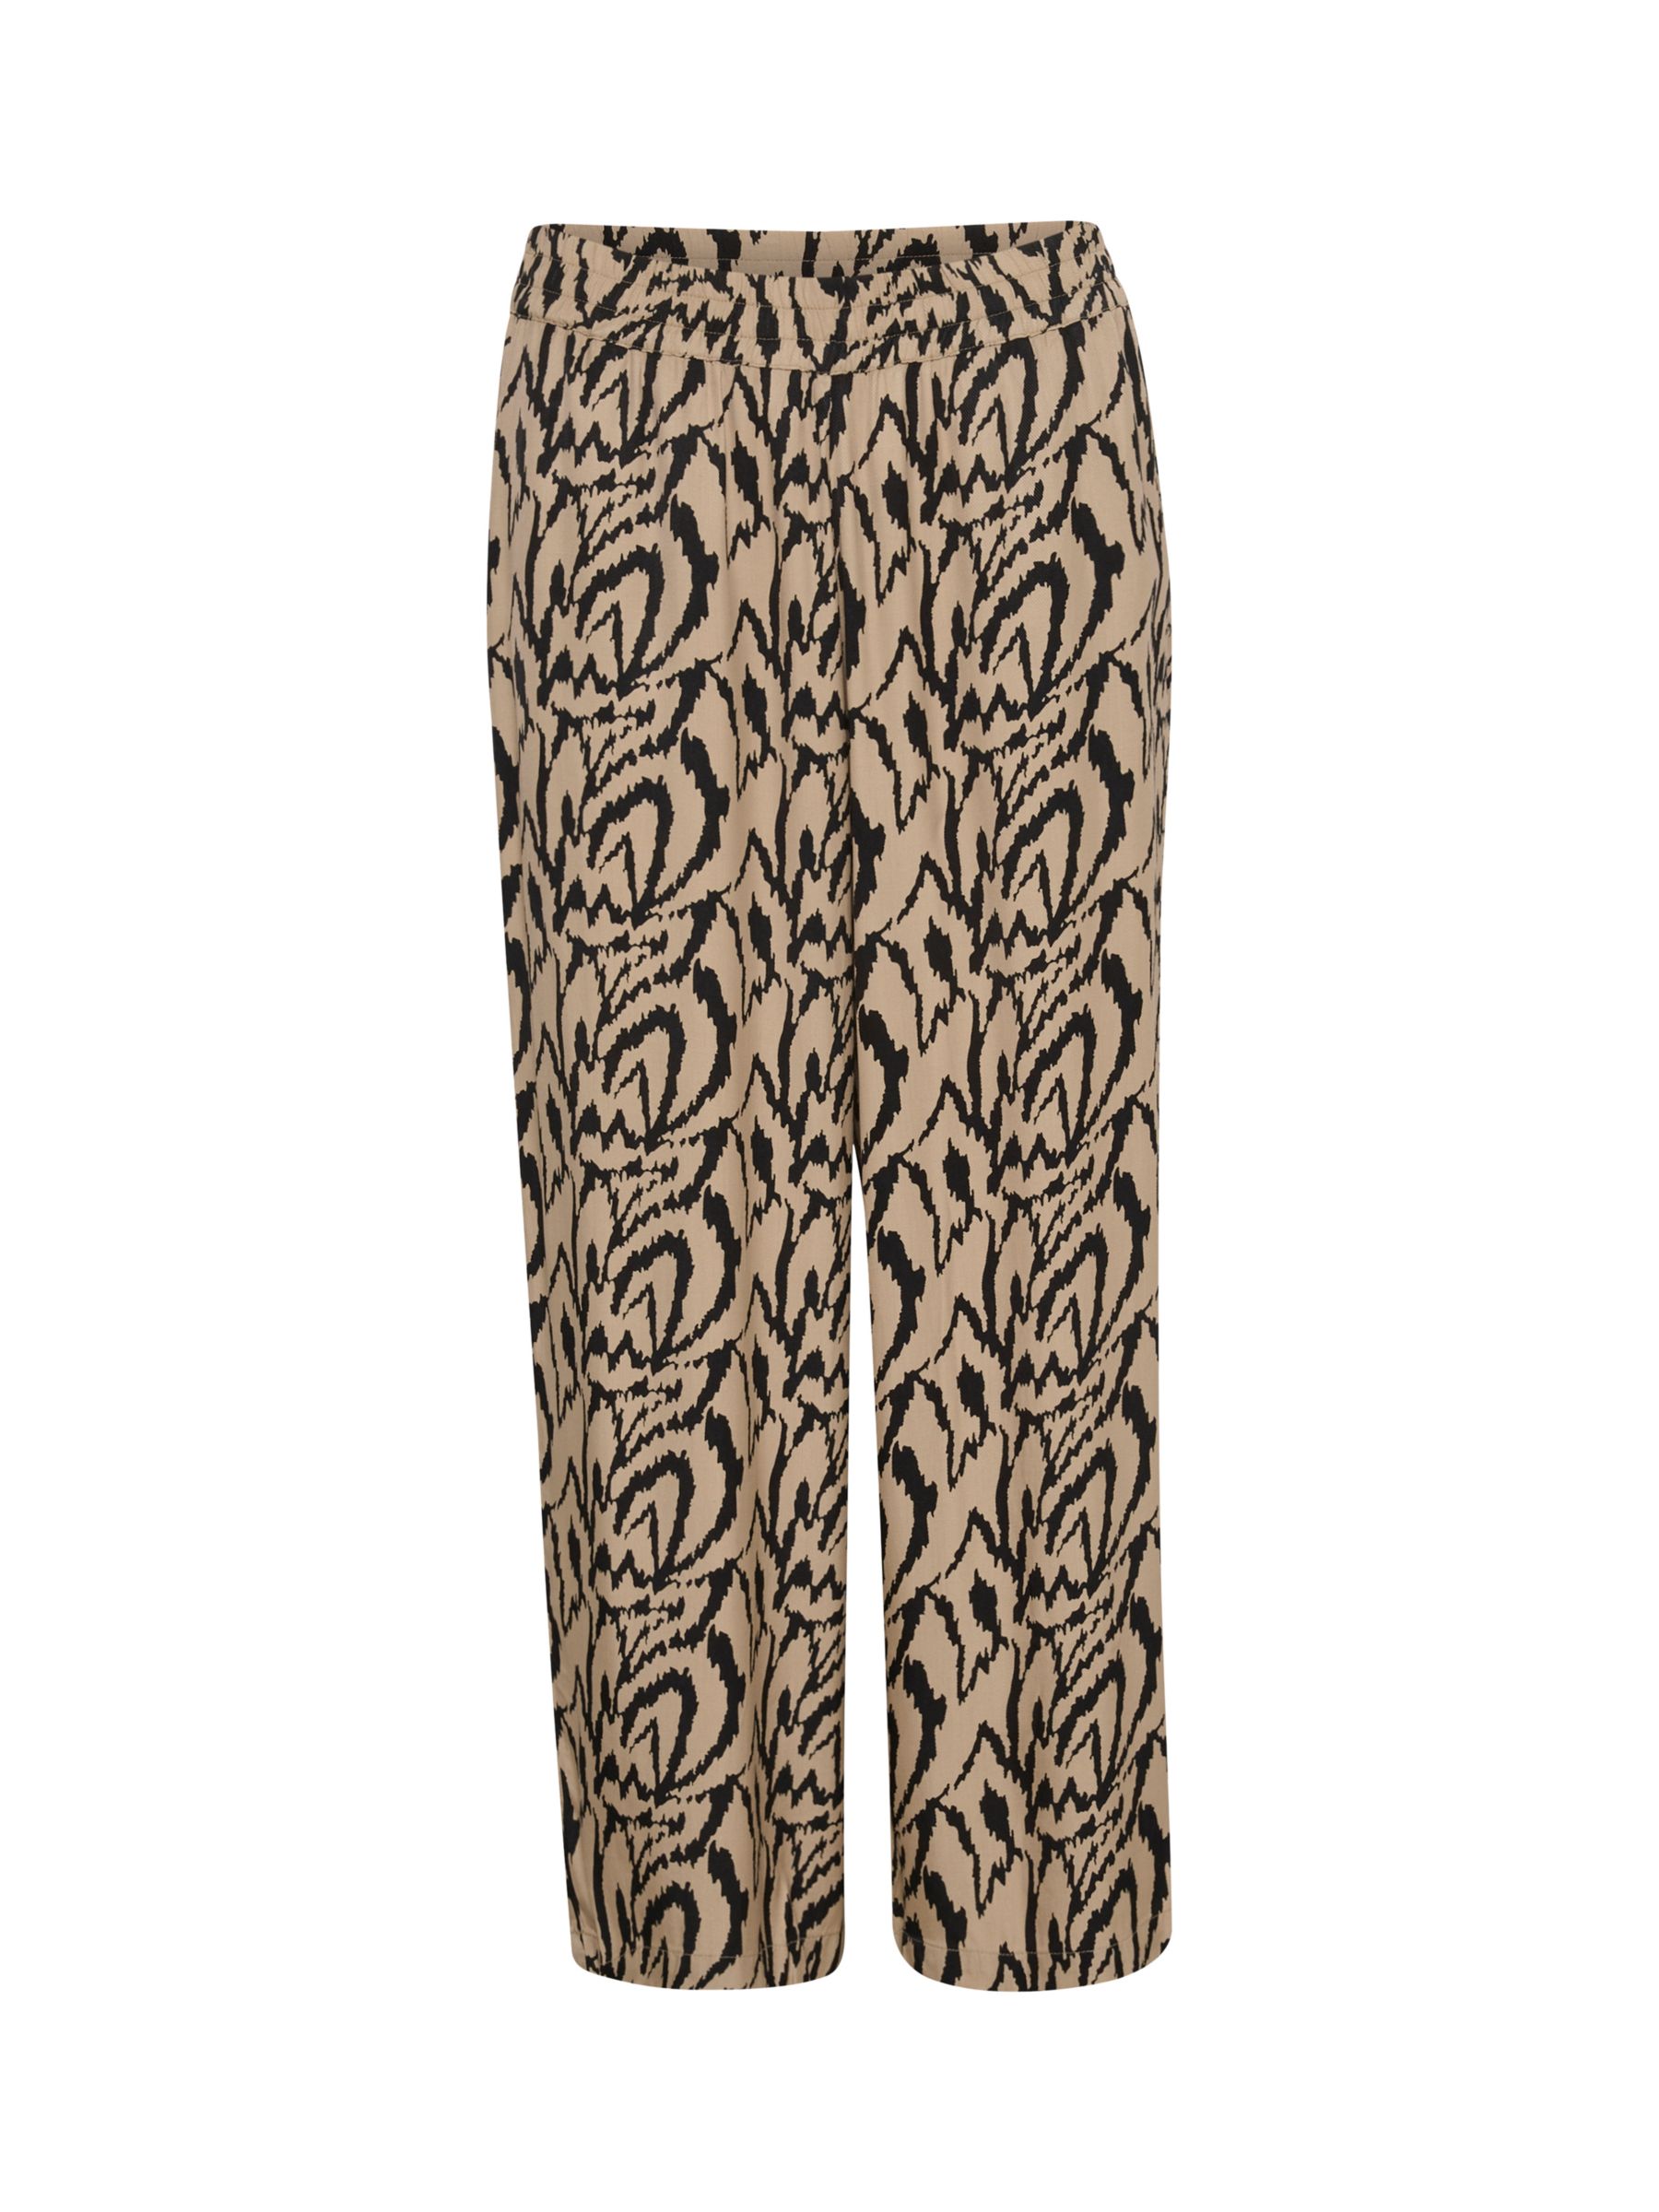 Buy Kaffe Criti Abstract Print Trousers, Sand/Black Online at johnlewis.com